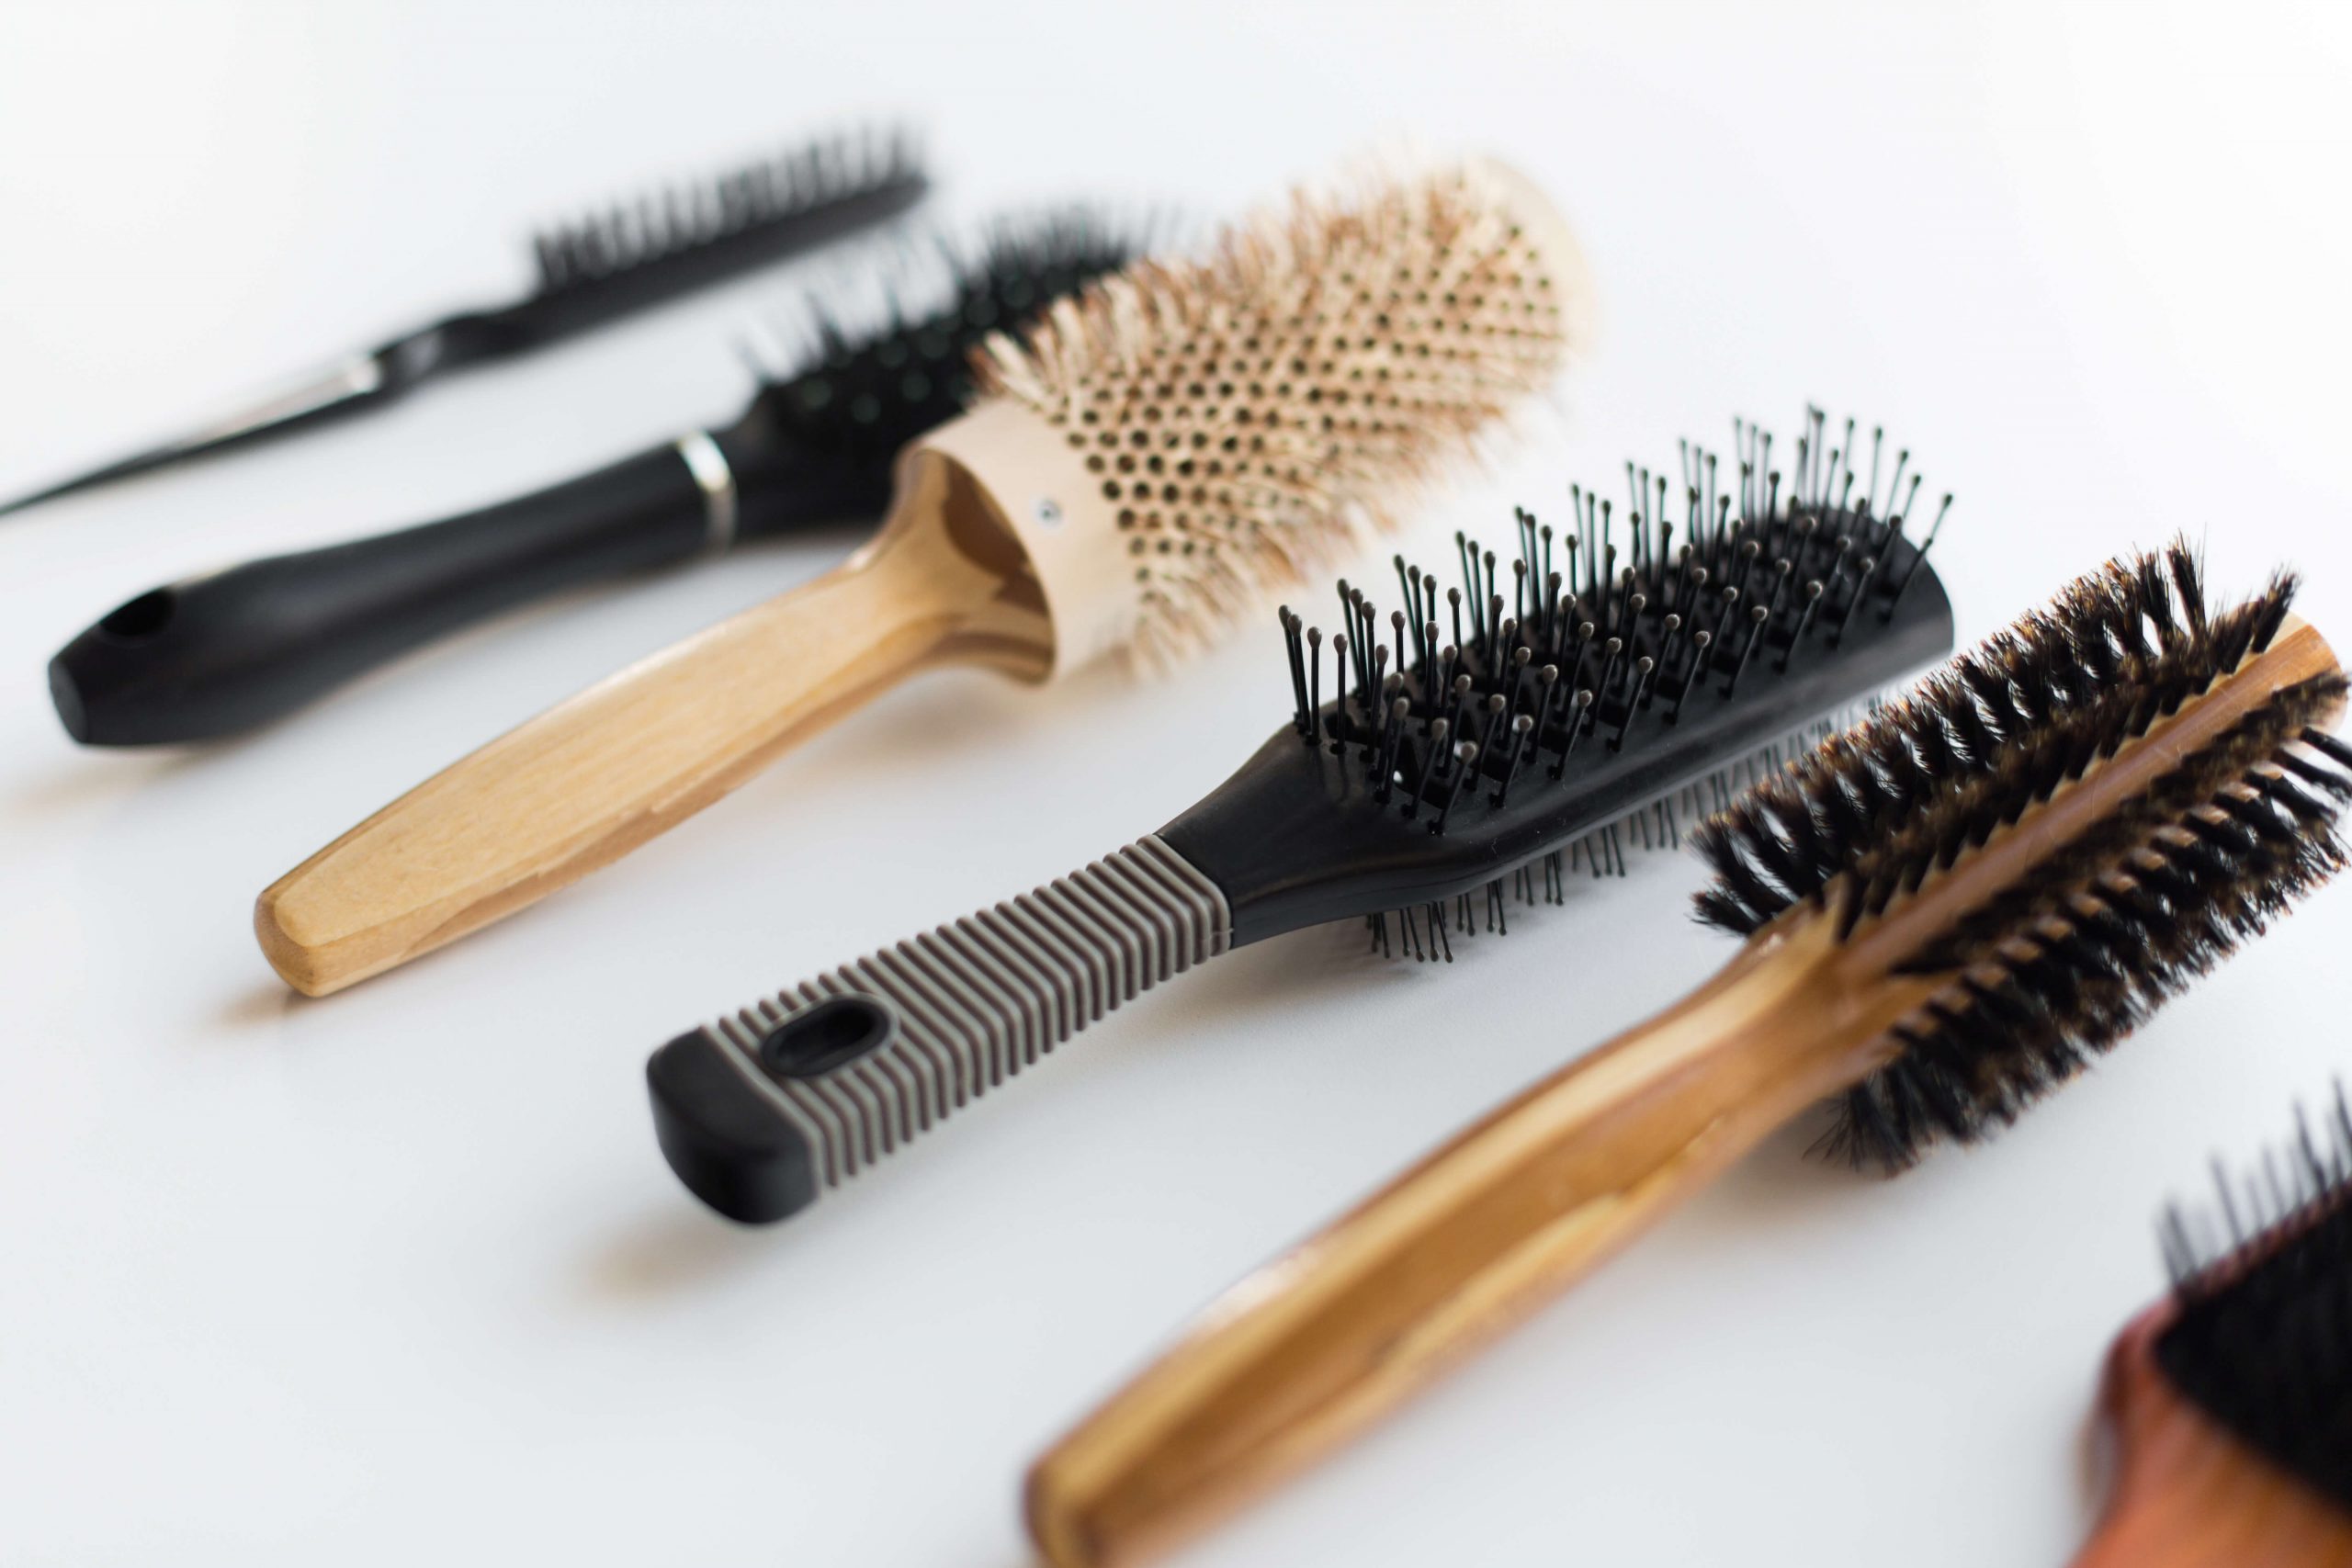 A guide to hair brushes. You’ll be surprised how many types there are